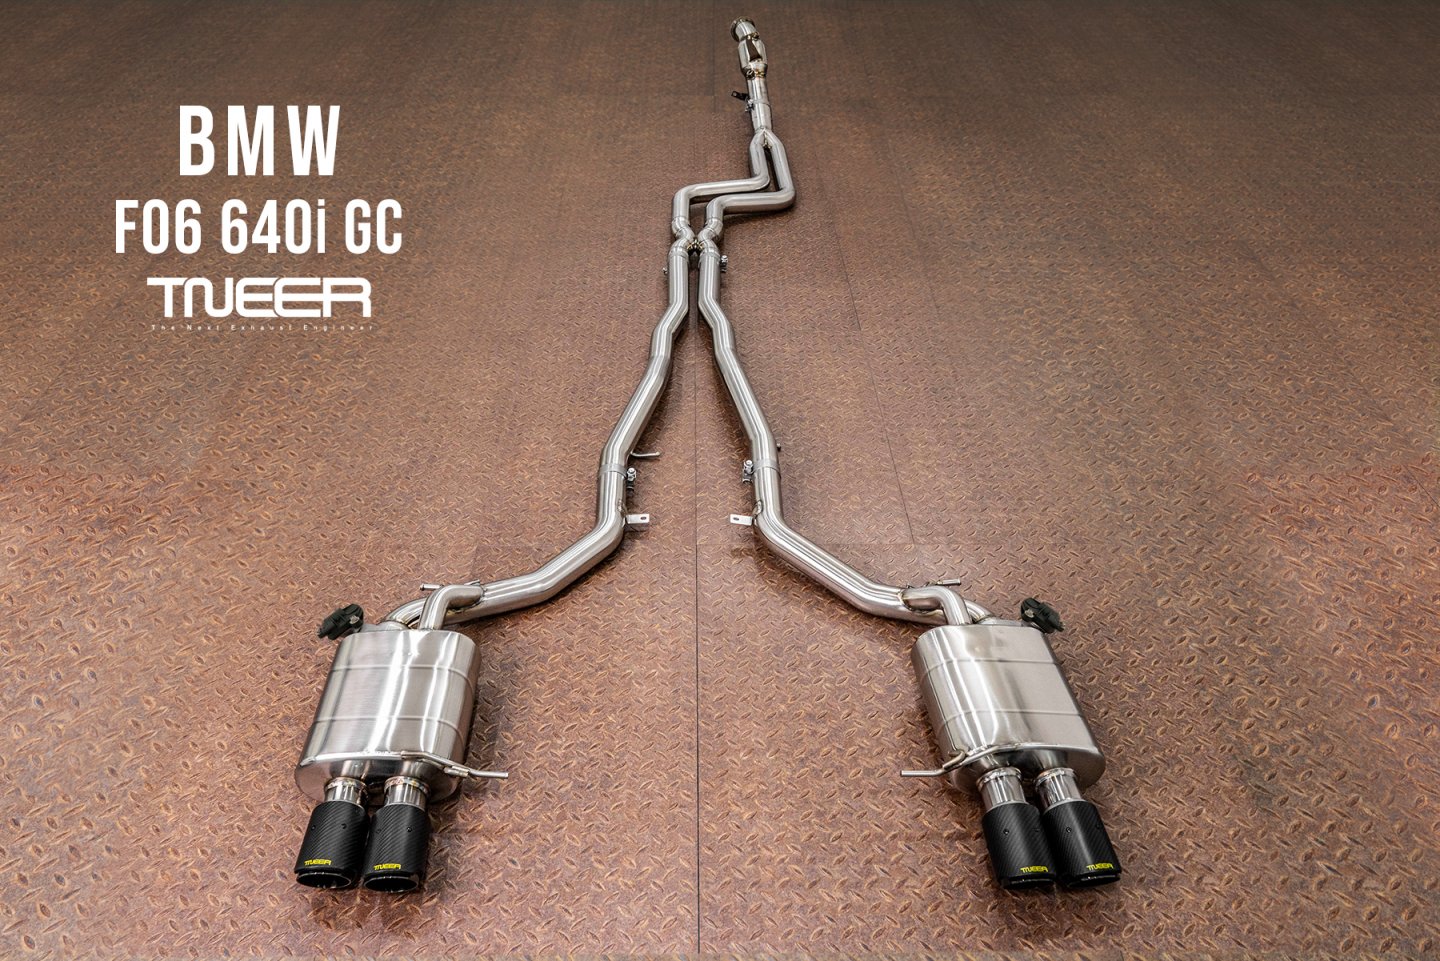 Audi S3 (8P) Milltek Turbo-Back Exhaust With High-Flow Catalyst (Polished Trims)